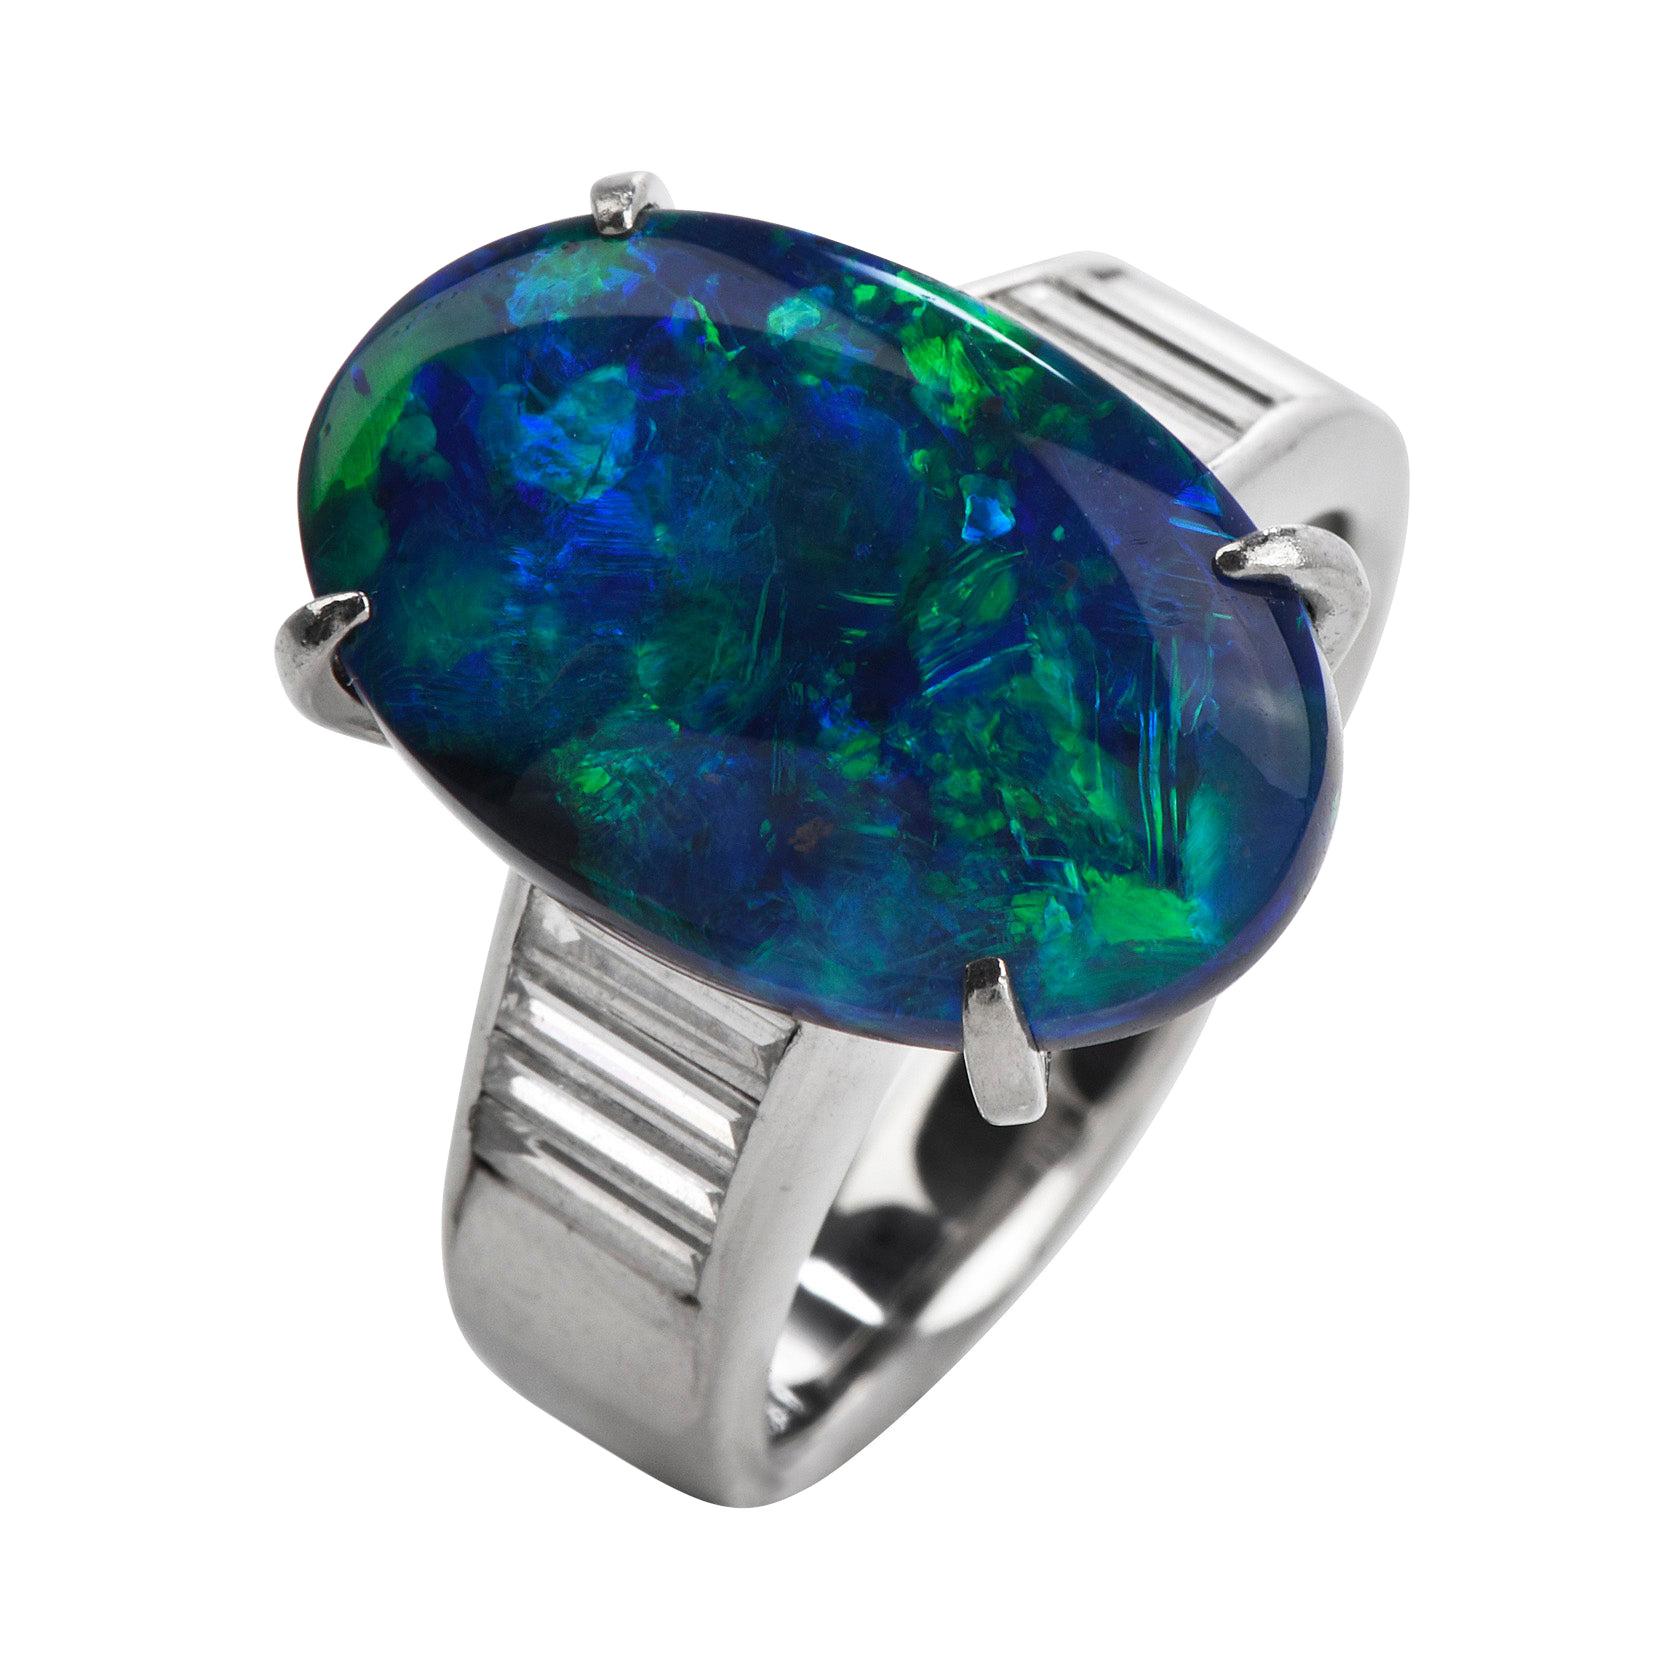 This GIA Natural Black Opal and Diamond Cocktail Ring  with a total weight of 11.18 grams. Centered  with natural genuine Black opal Expertly mounted in solid platinum weighing approx. 7.00 carats, accentuated by 8 baguette-cut Genuine Diamonds